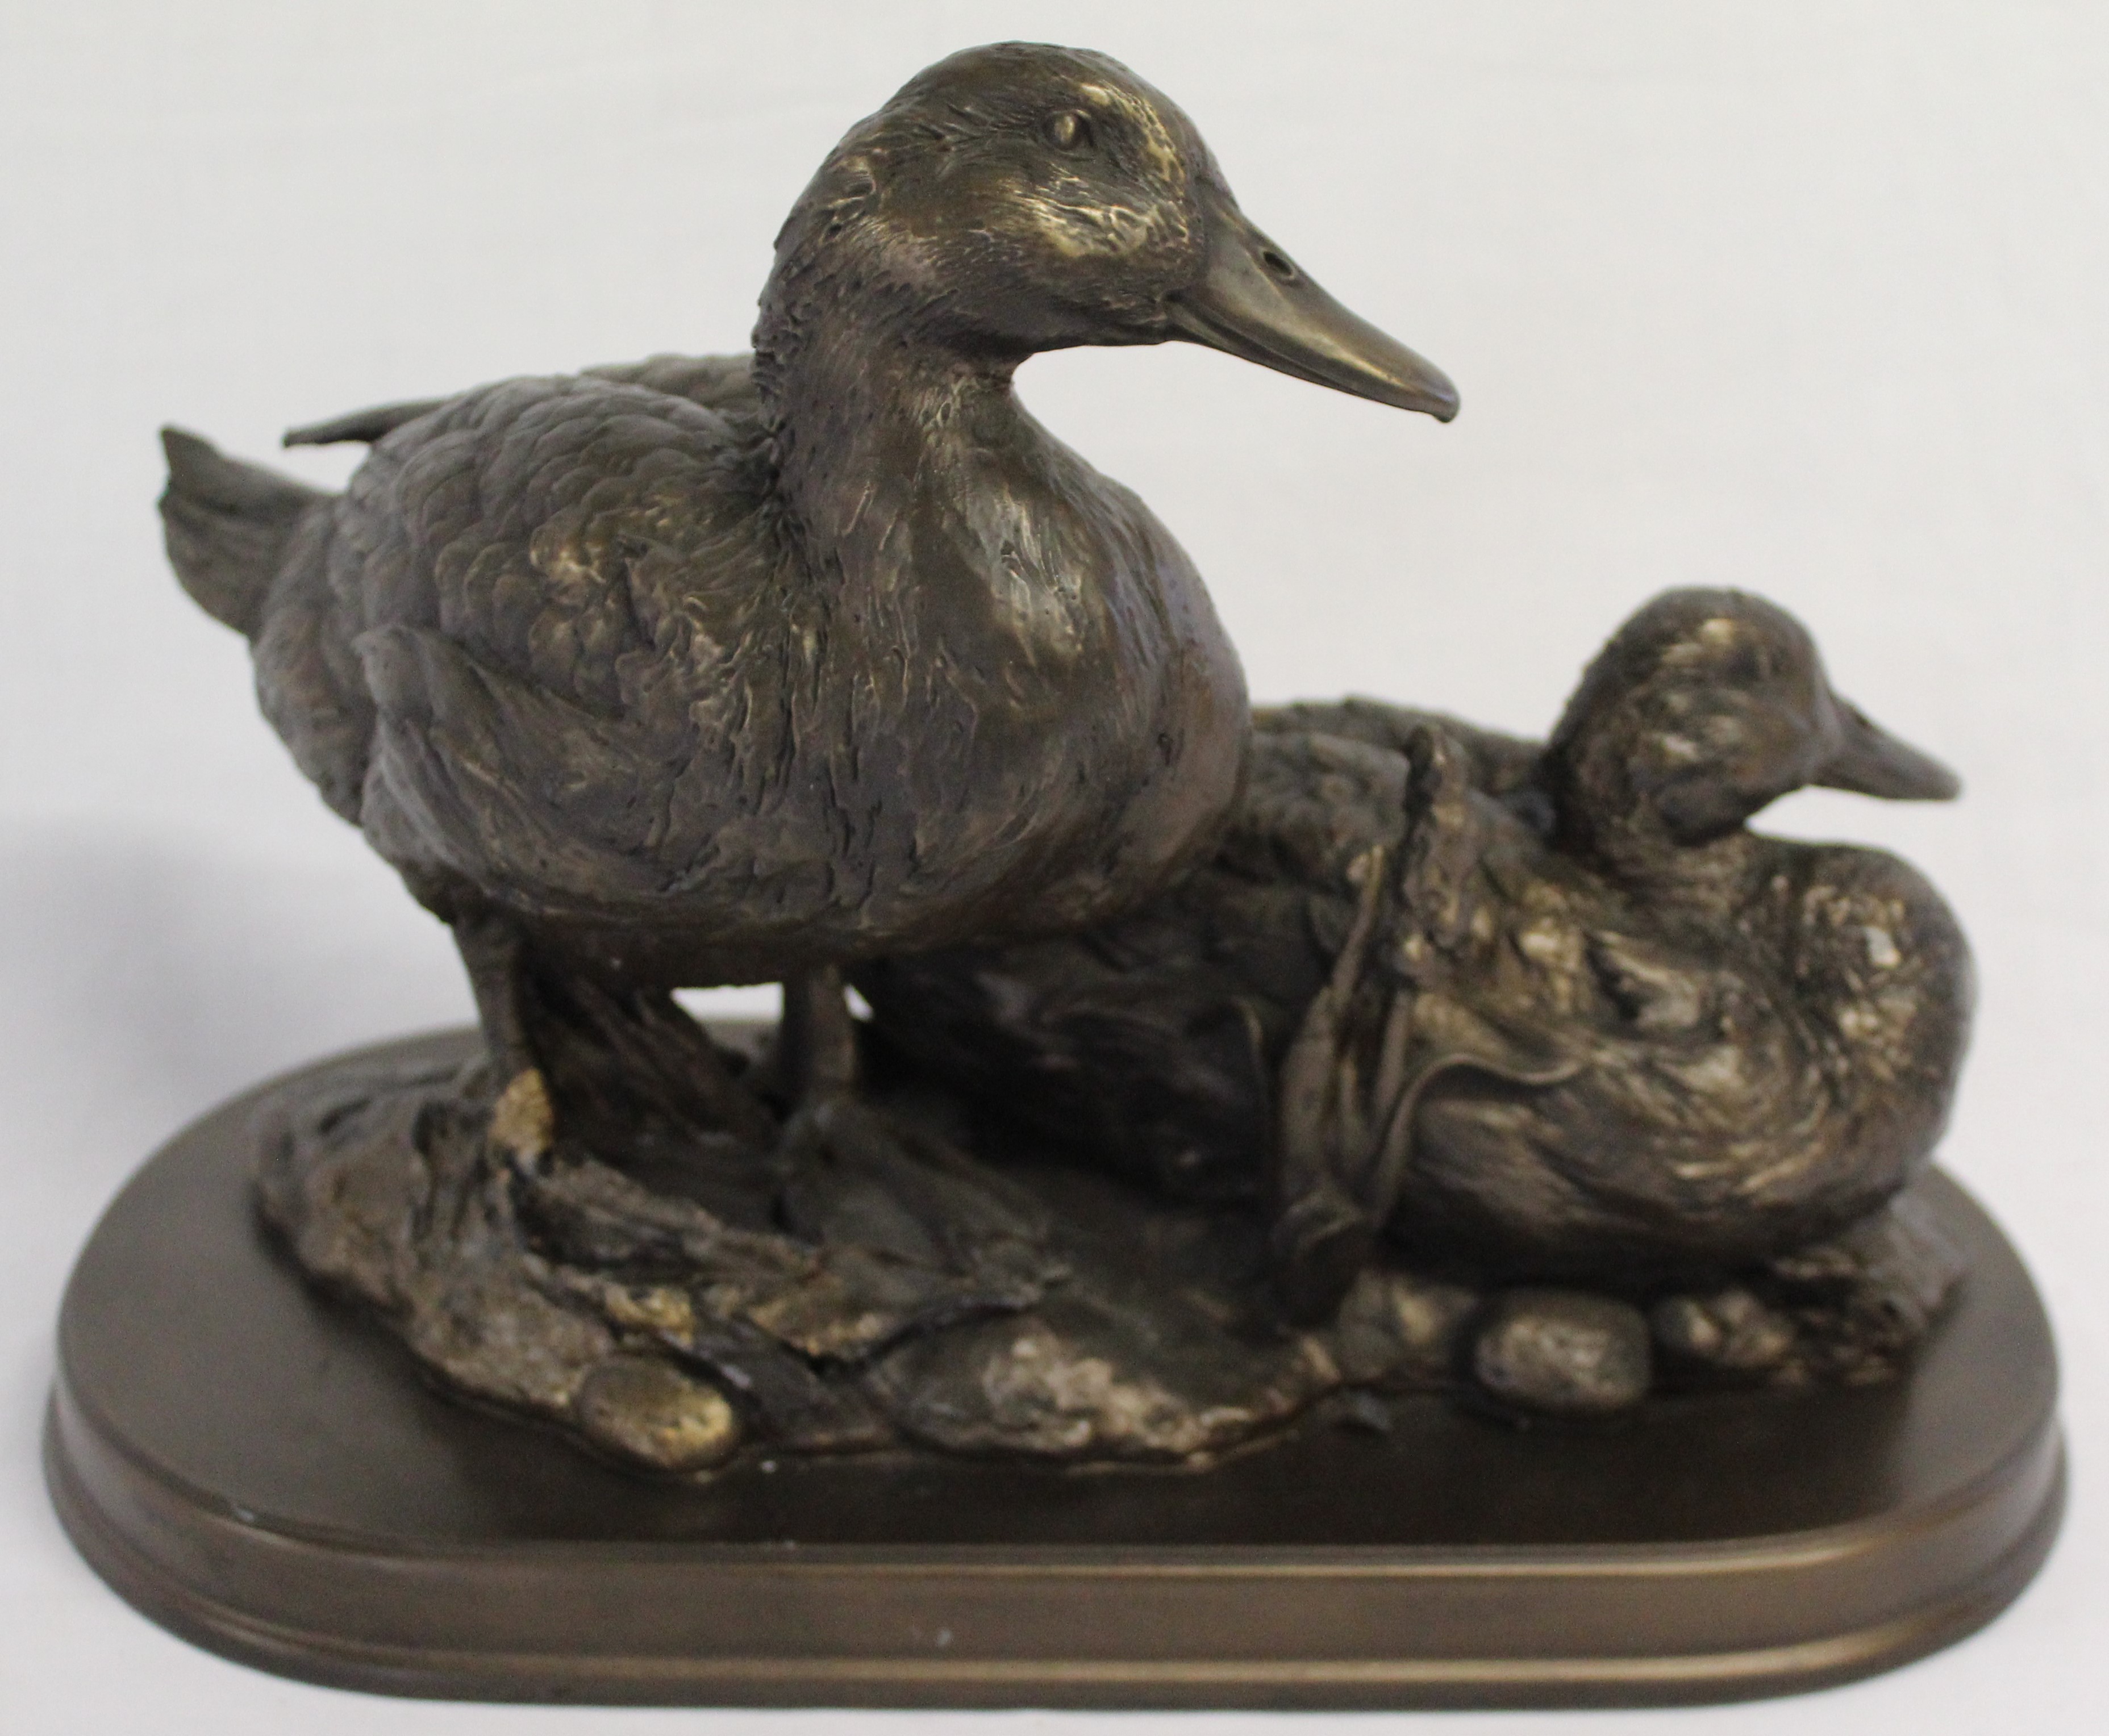 Leonardo Collection resin ducks on stand, W32cm x H24cm, other figures including a cockerel, two